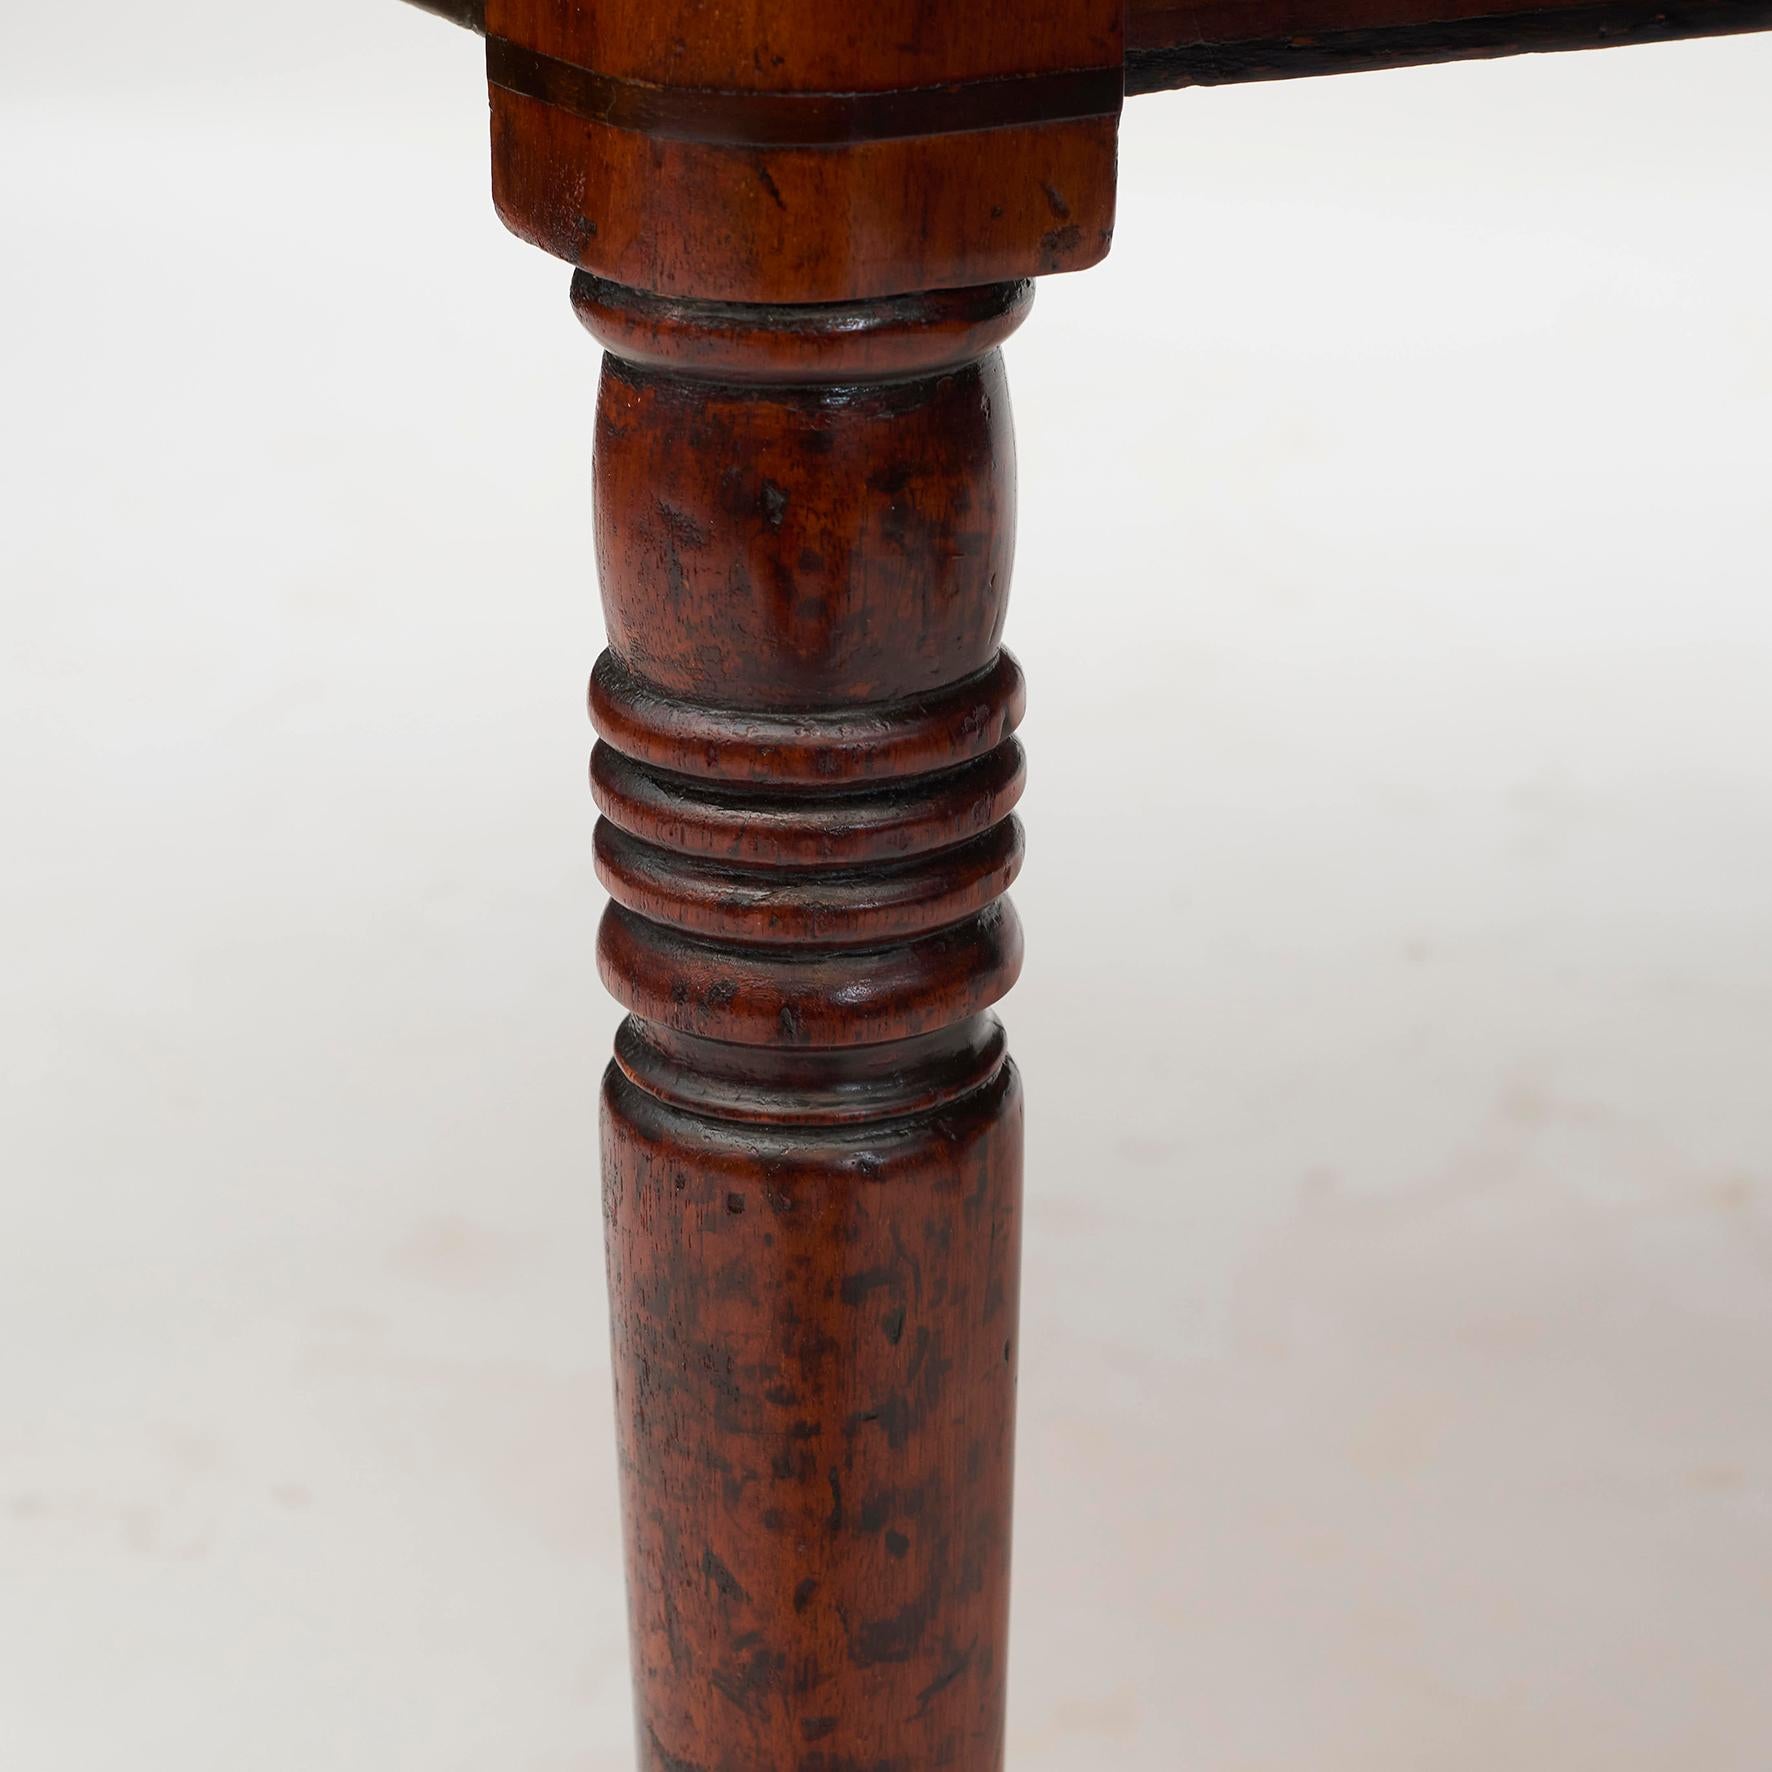 19th Century English Regency Partners Desk with Drawers and Writing Surfaces on Each Side